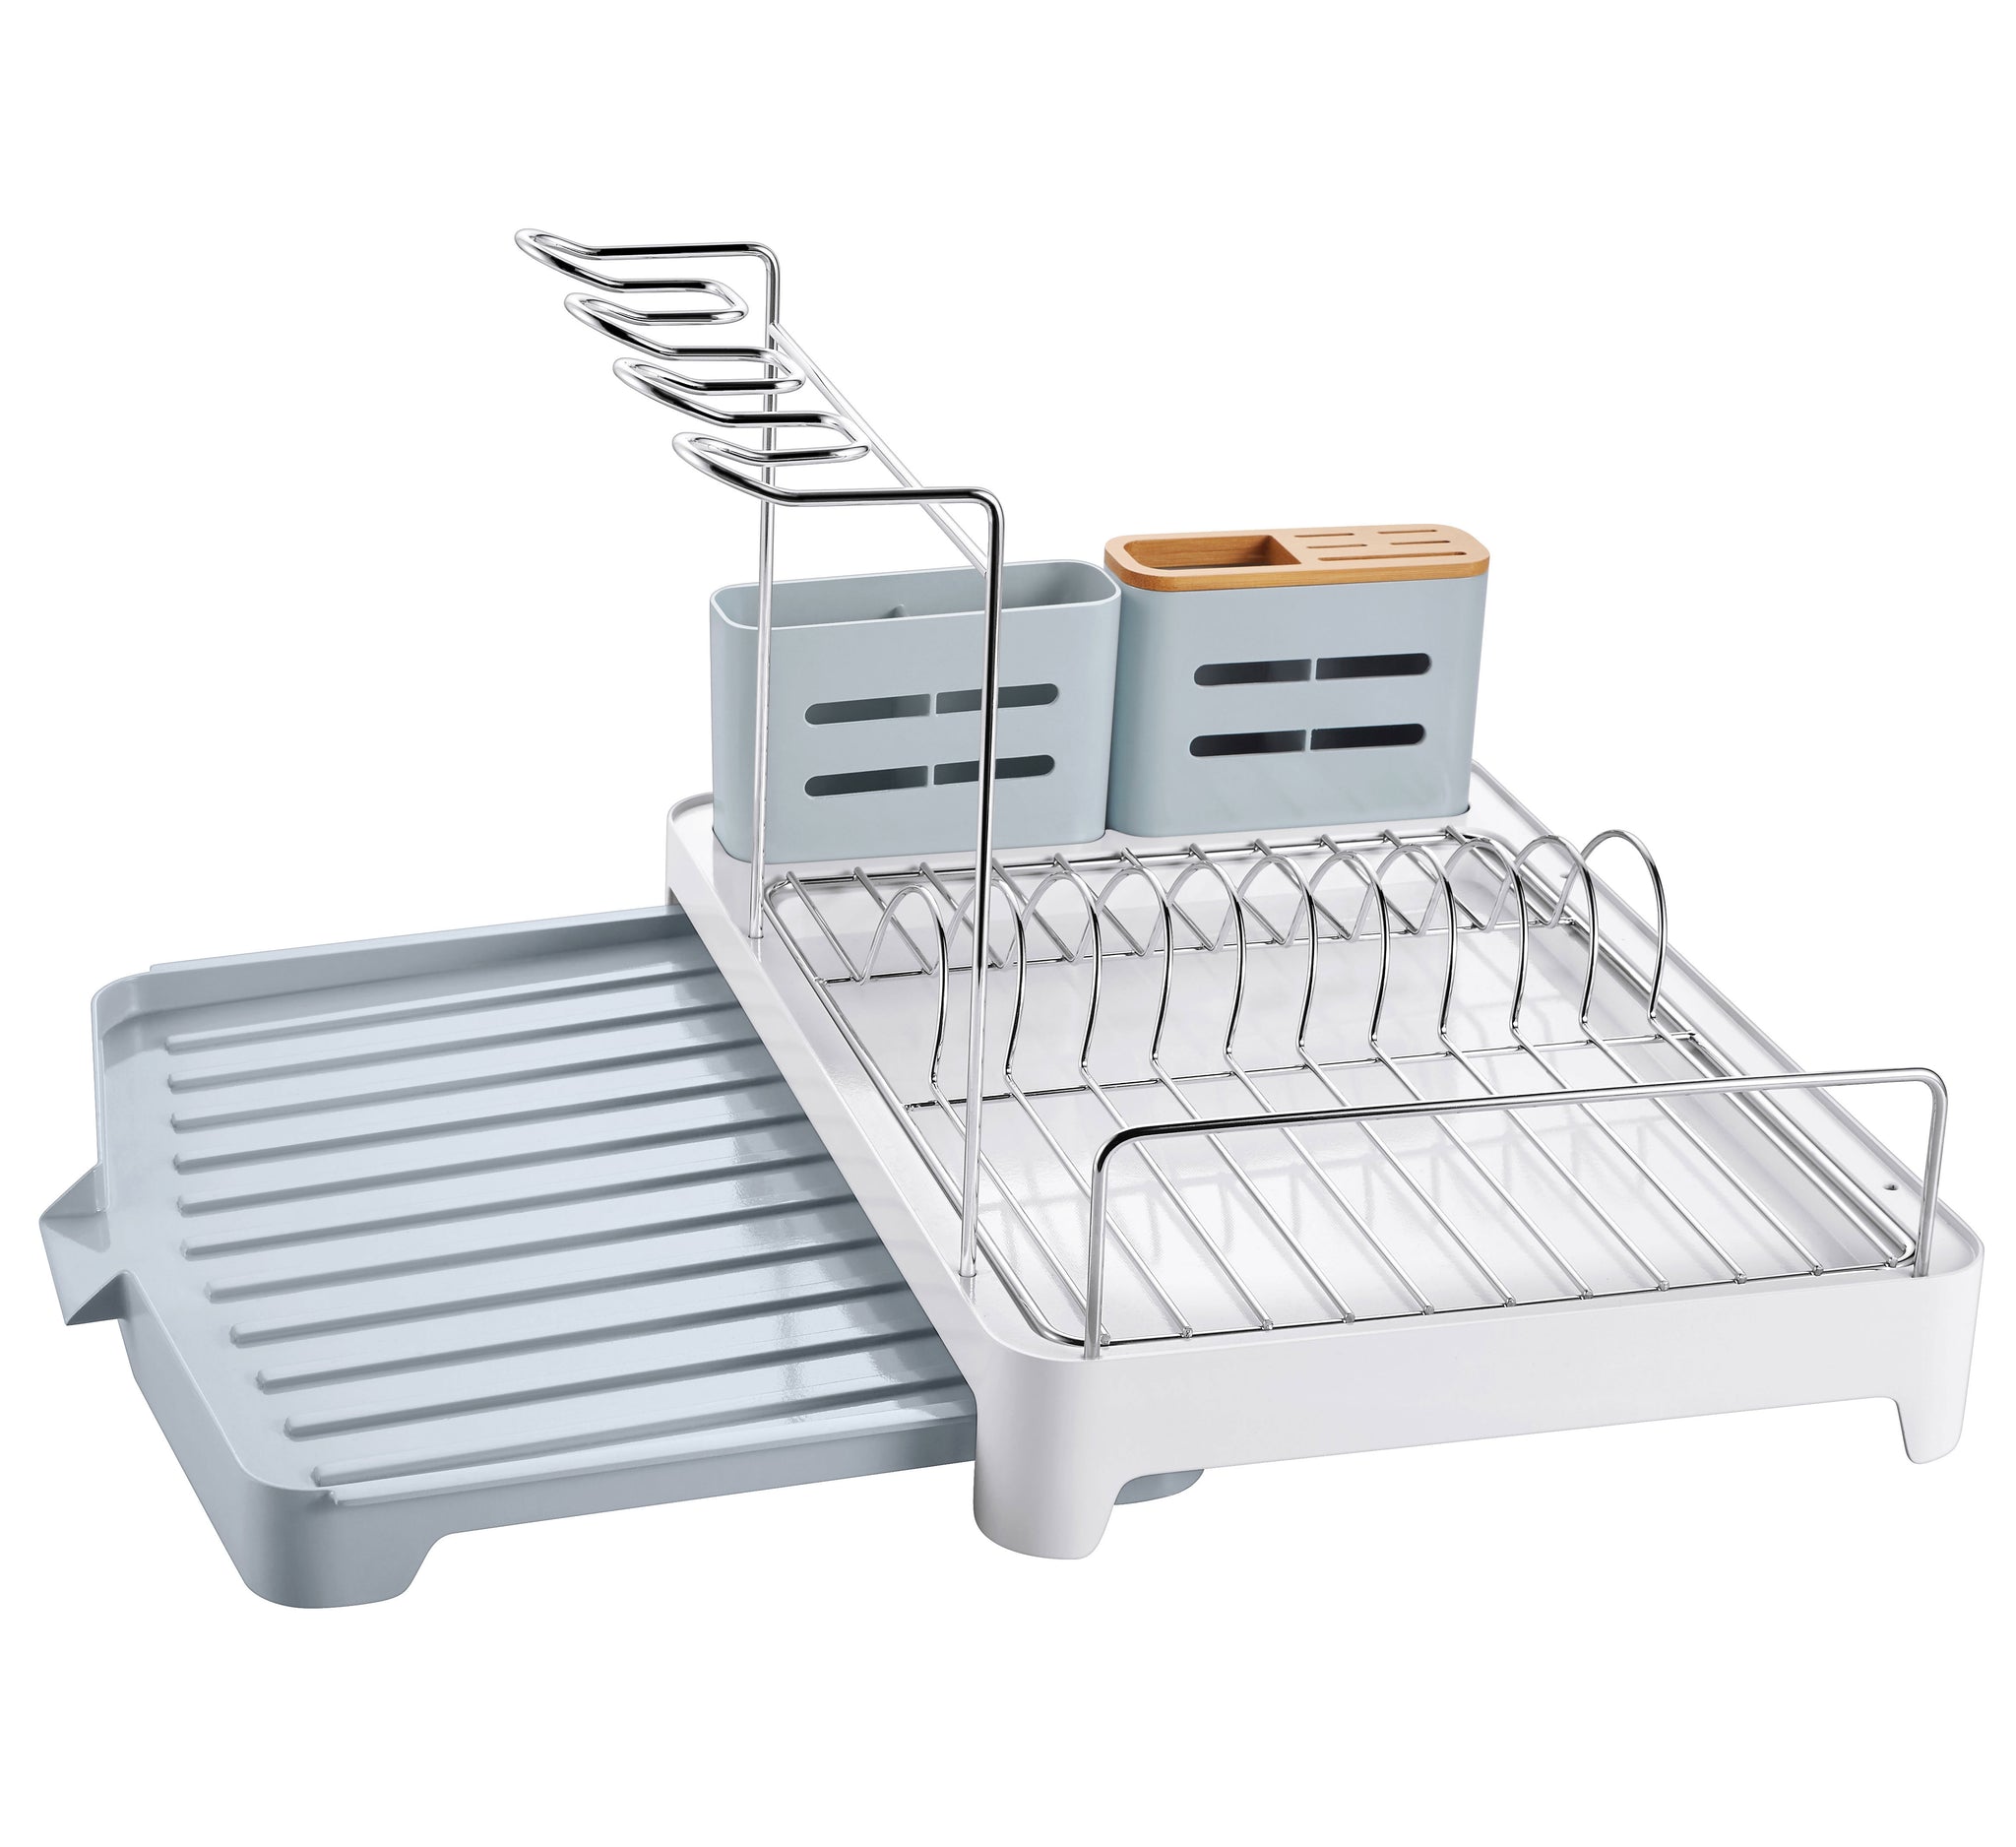 Dish Drying Rack with Drainboard set, Large 2-Tier Detachable Dish Drainers  with Wine Glass Holder& Utensil Holder, Stainless Steel Rustproof Dish